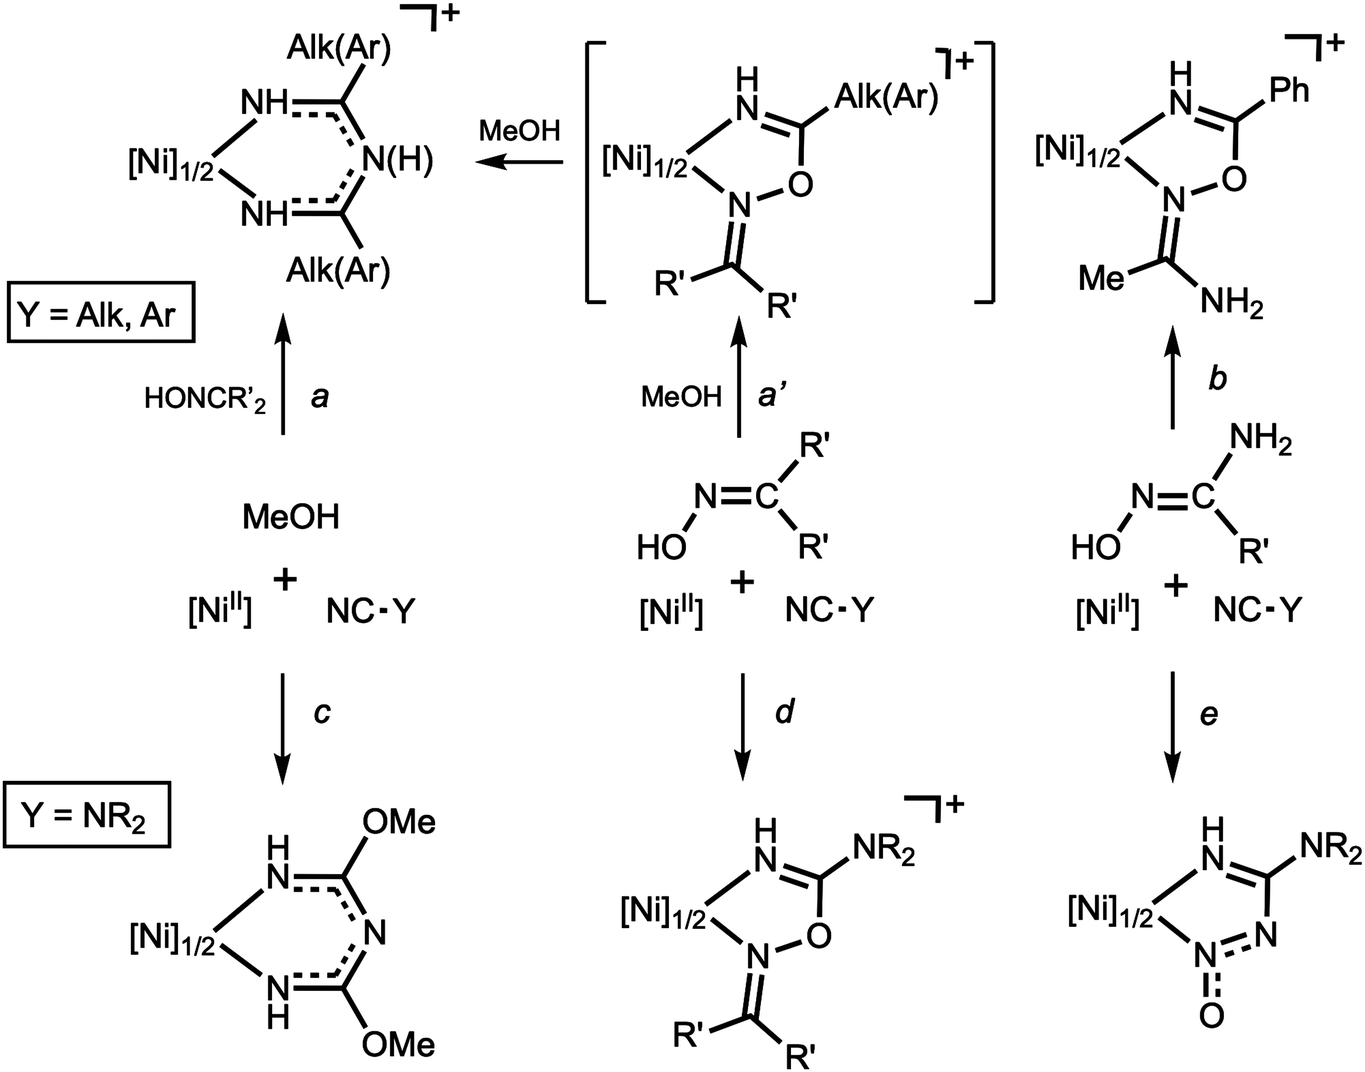 Nickel Ii Mediated Cyanamide Pyrazole Coupling Highlights Distinct Reactivity Of Ncnr 2 And Ncr Nitrile Ligands New Journal Of Chemistry Rsc Publishing Doi 10 1039 D0njh